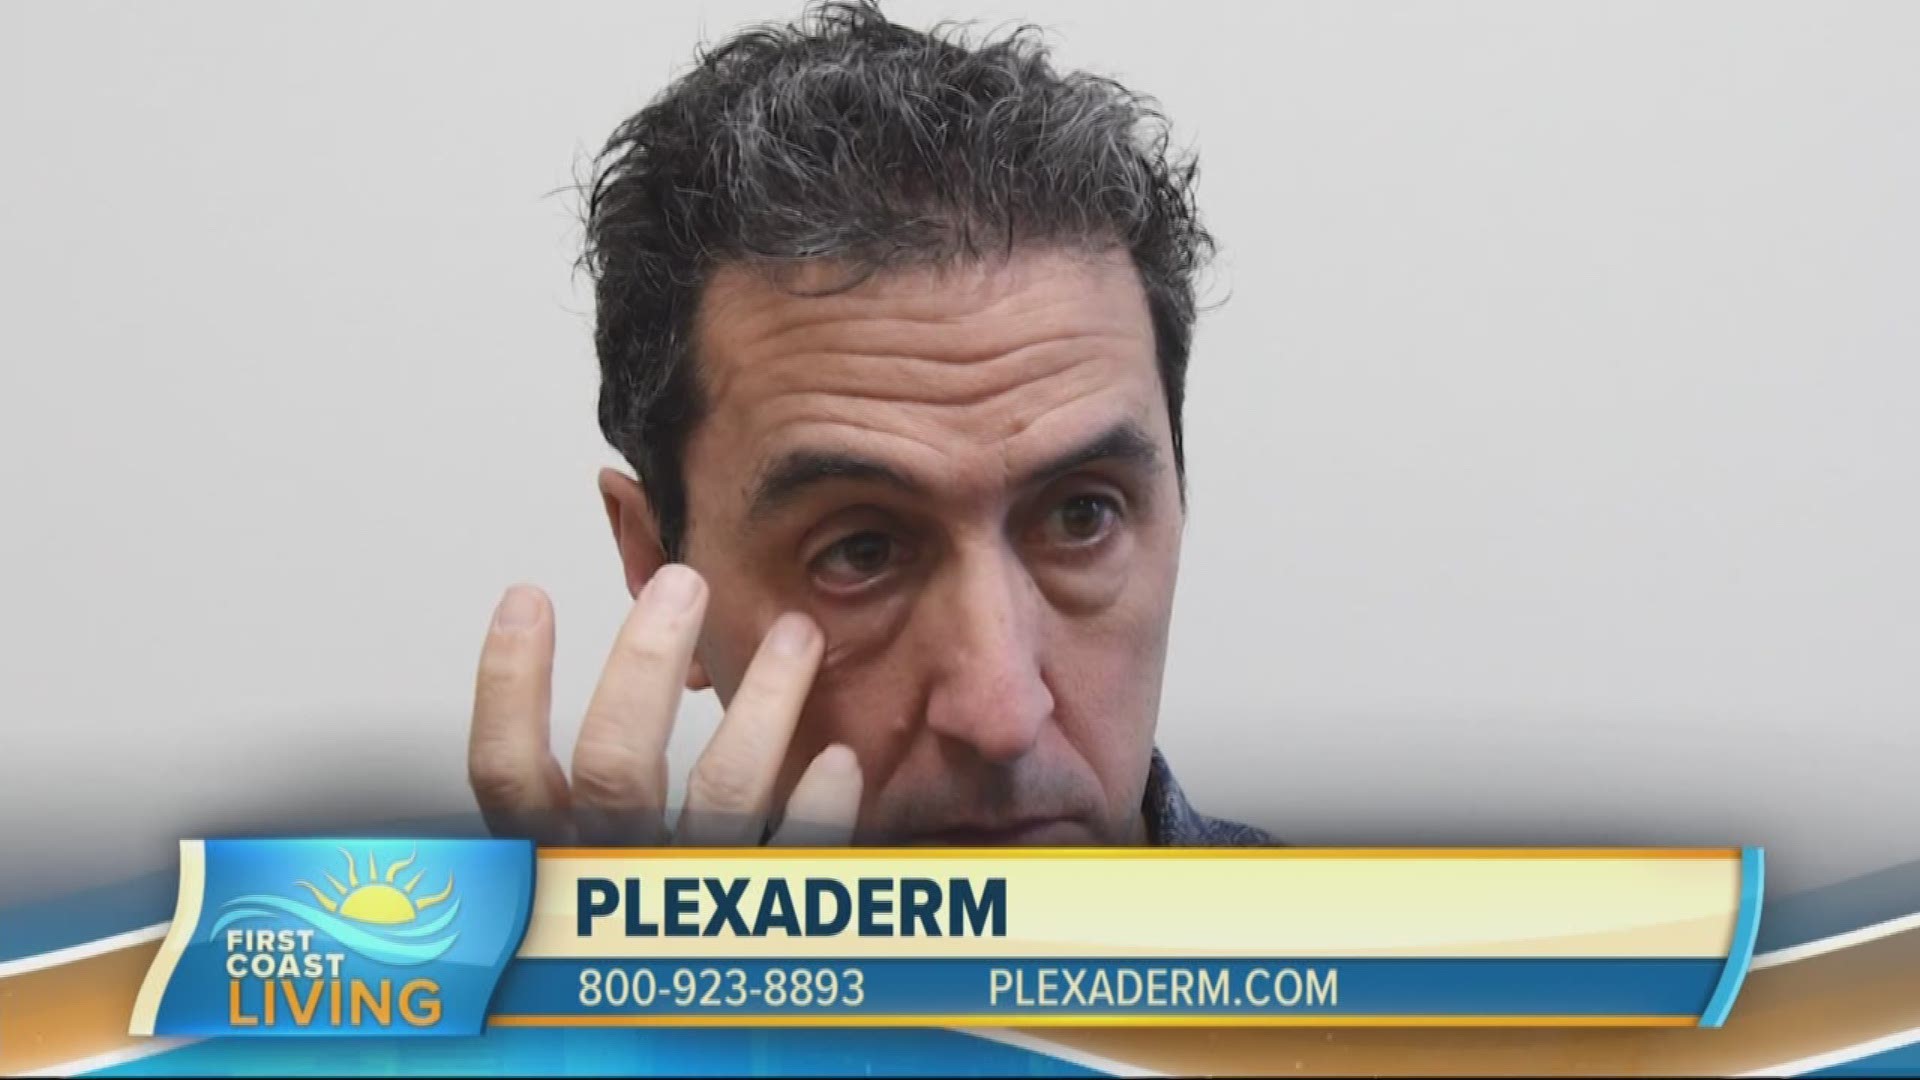 Reduce fine lines and wrinkles without surgery with the help of Plexaderm.